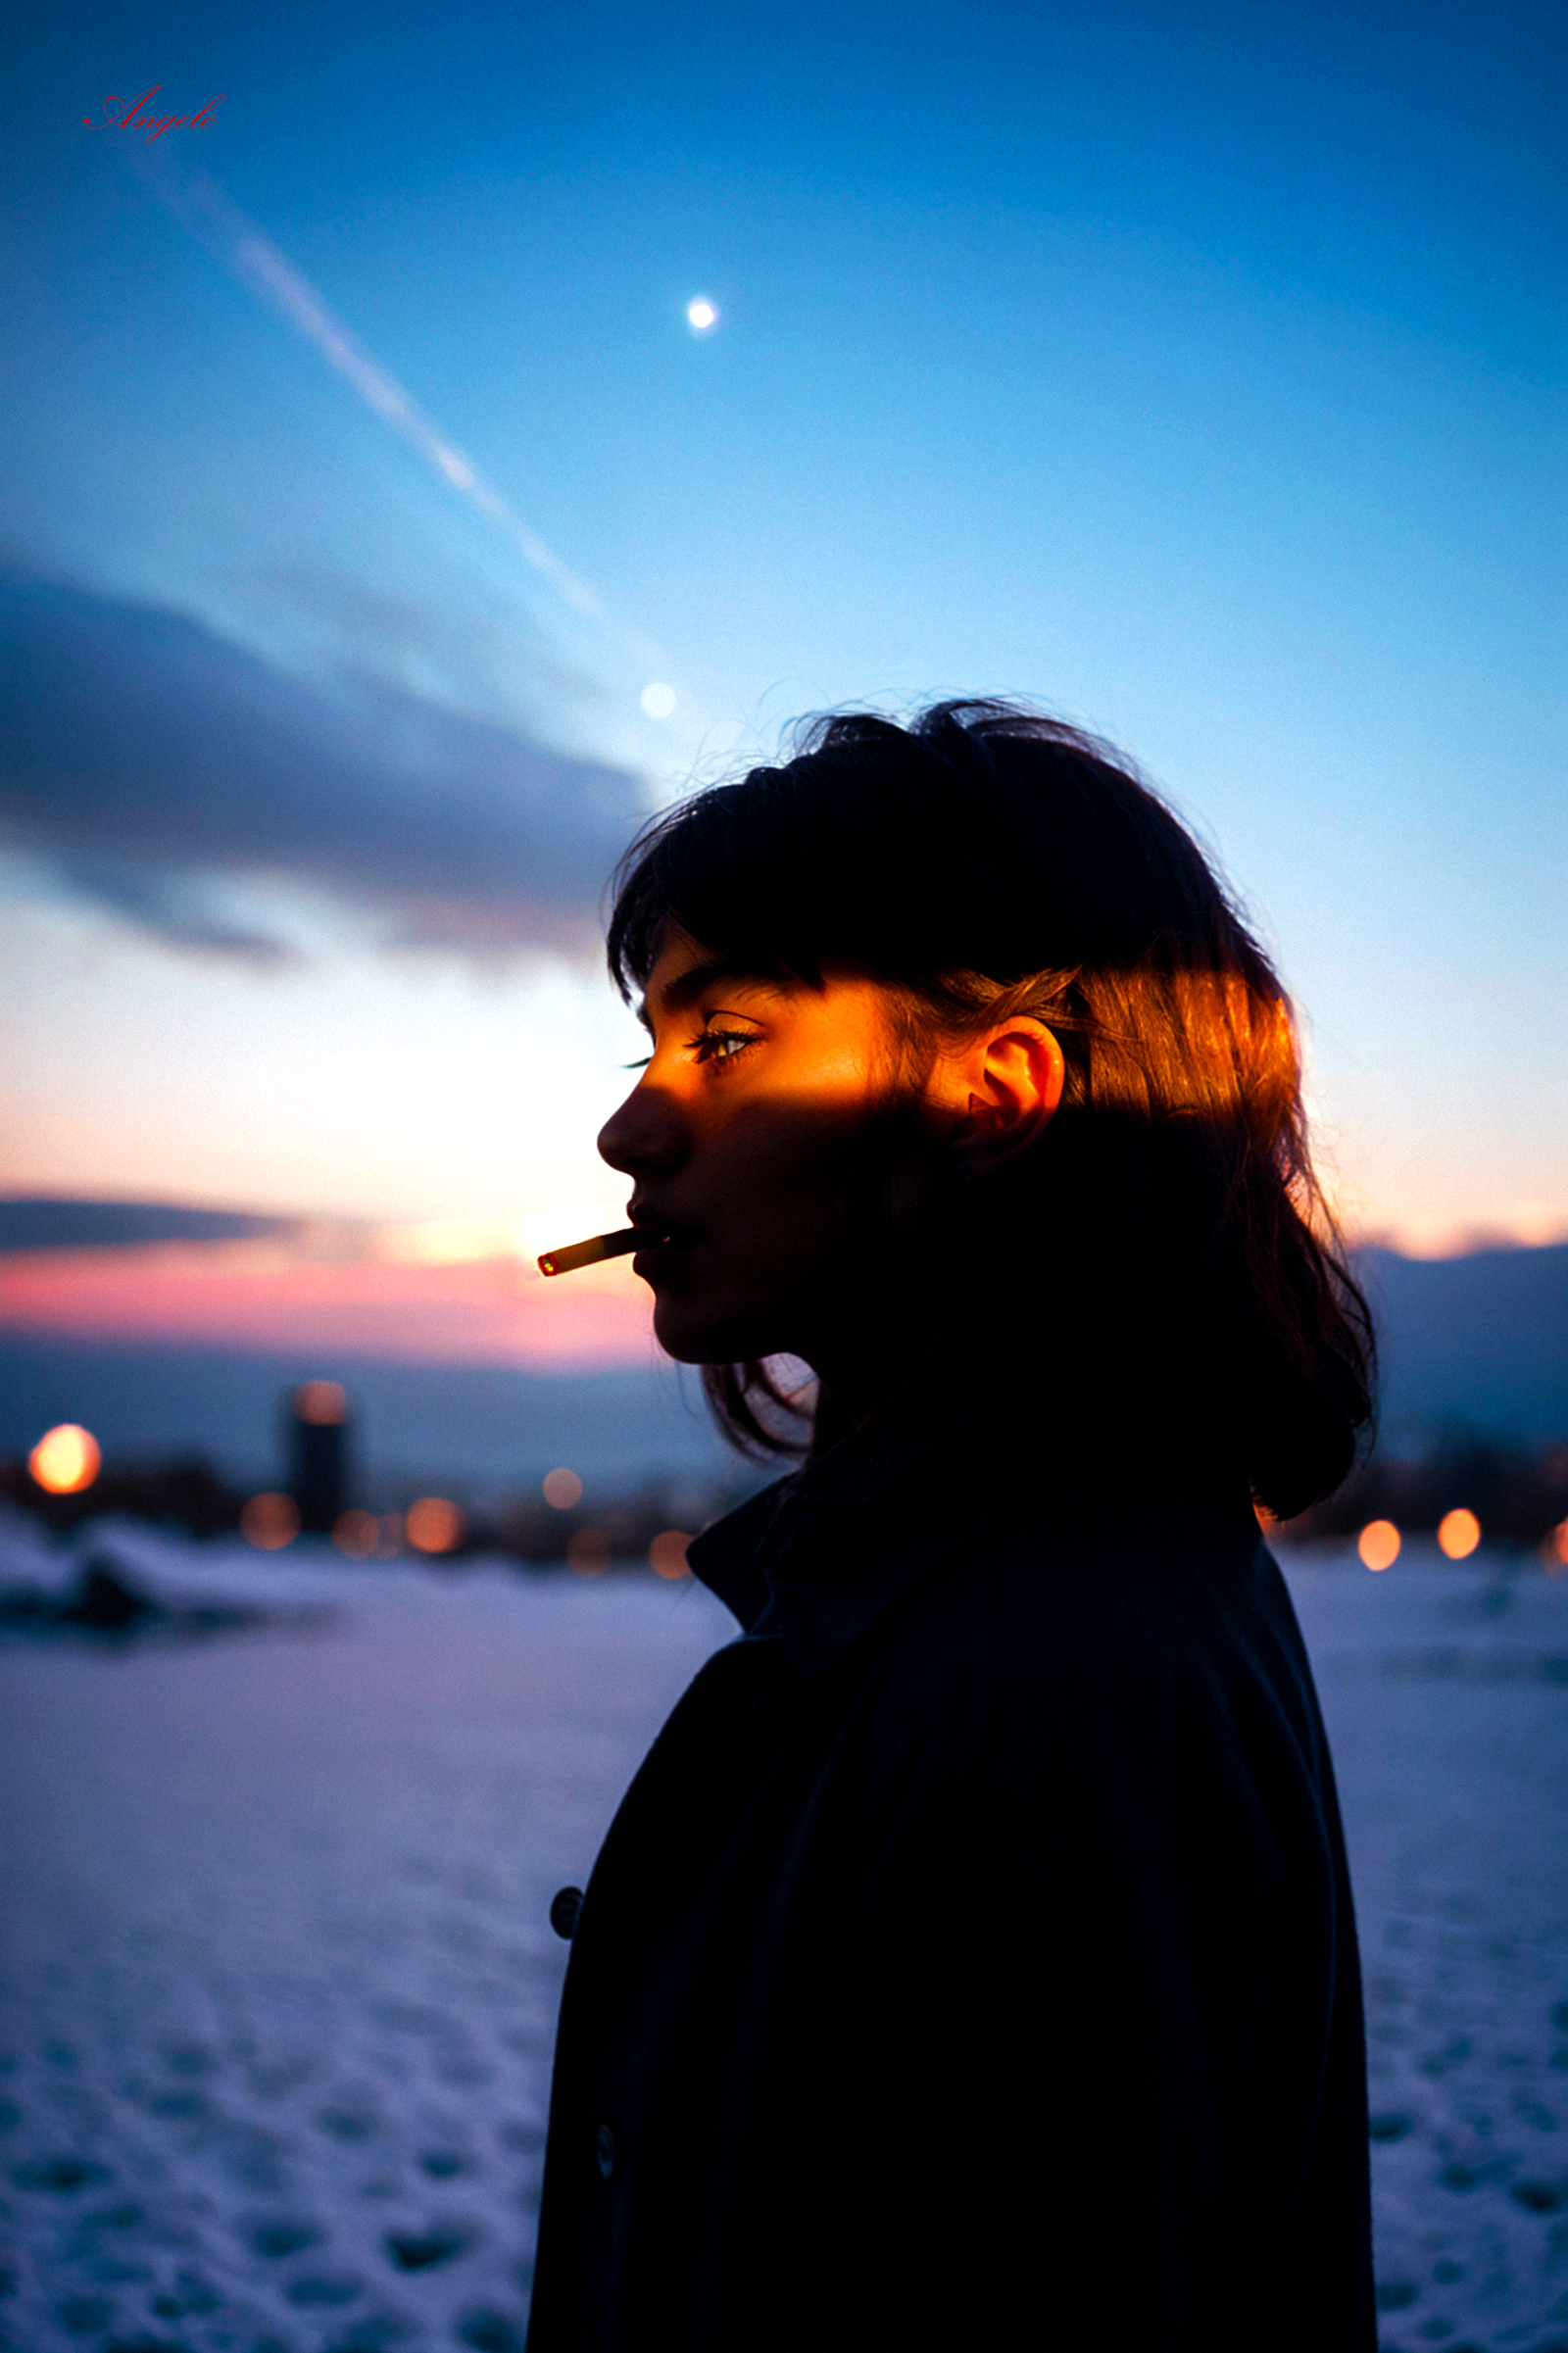 A woman smoking a cigarette while standing in the snow during a sunset.